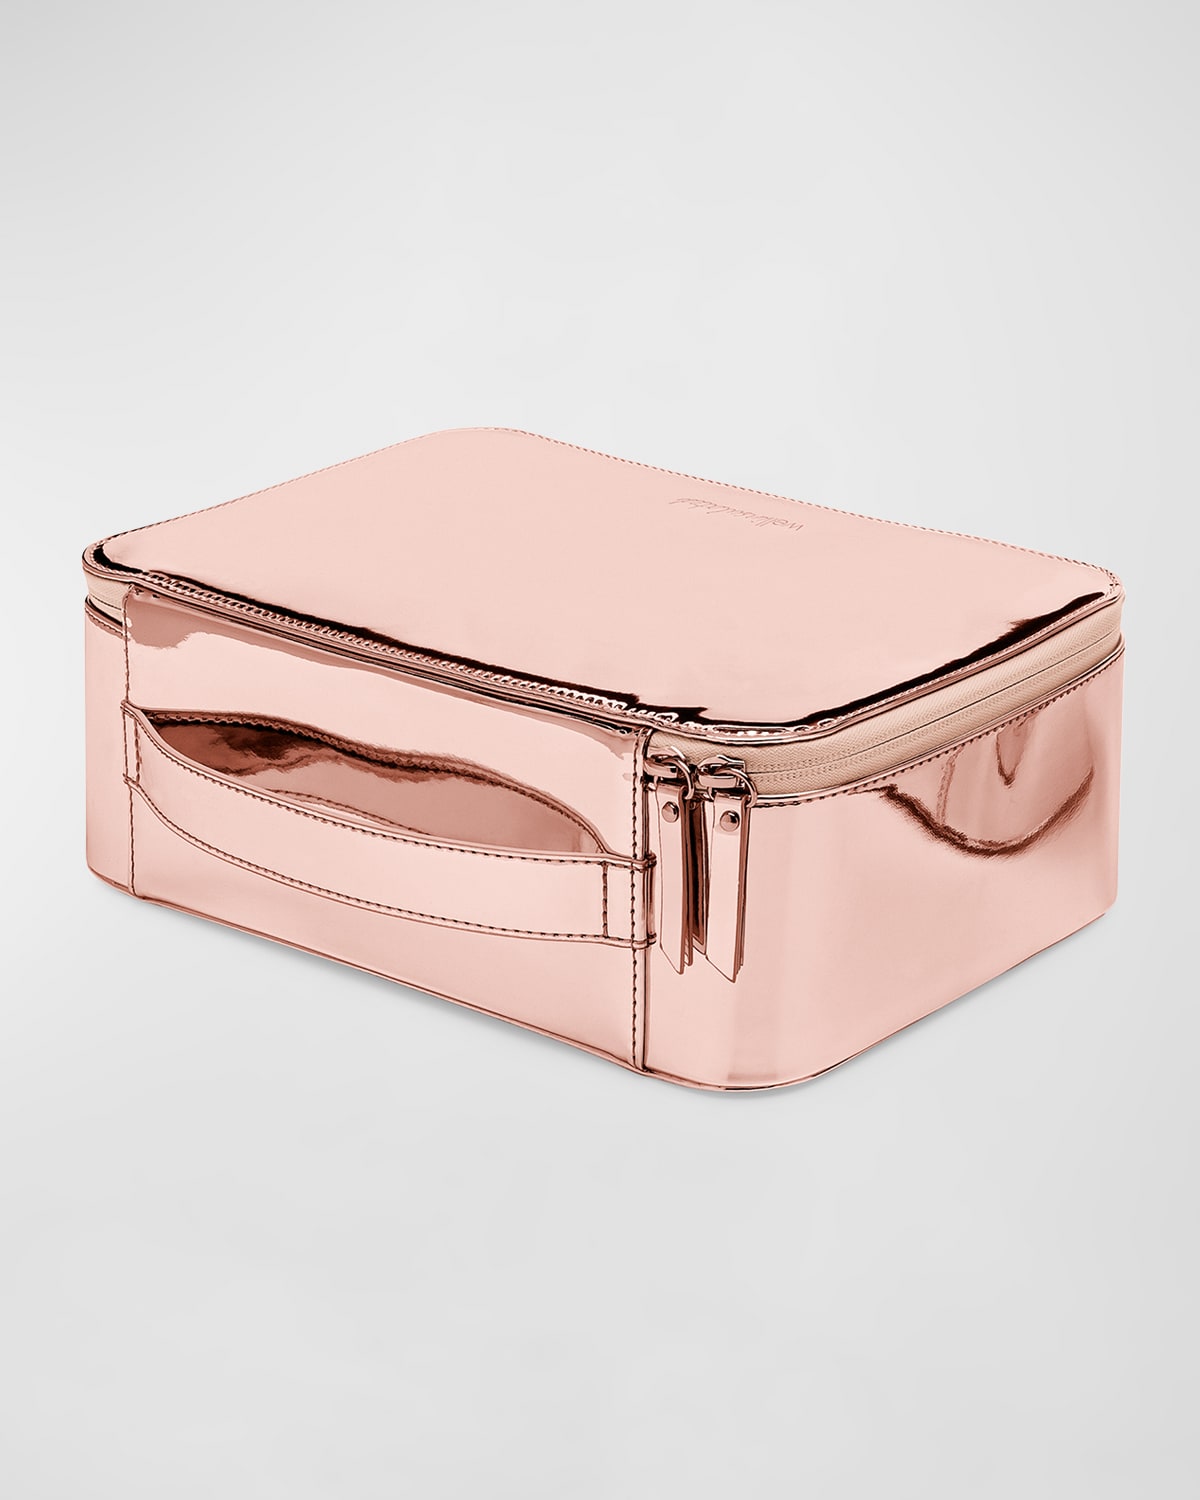 Wellinsulated Performance Travel Case In Rose Gold